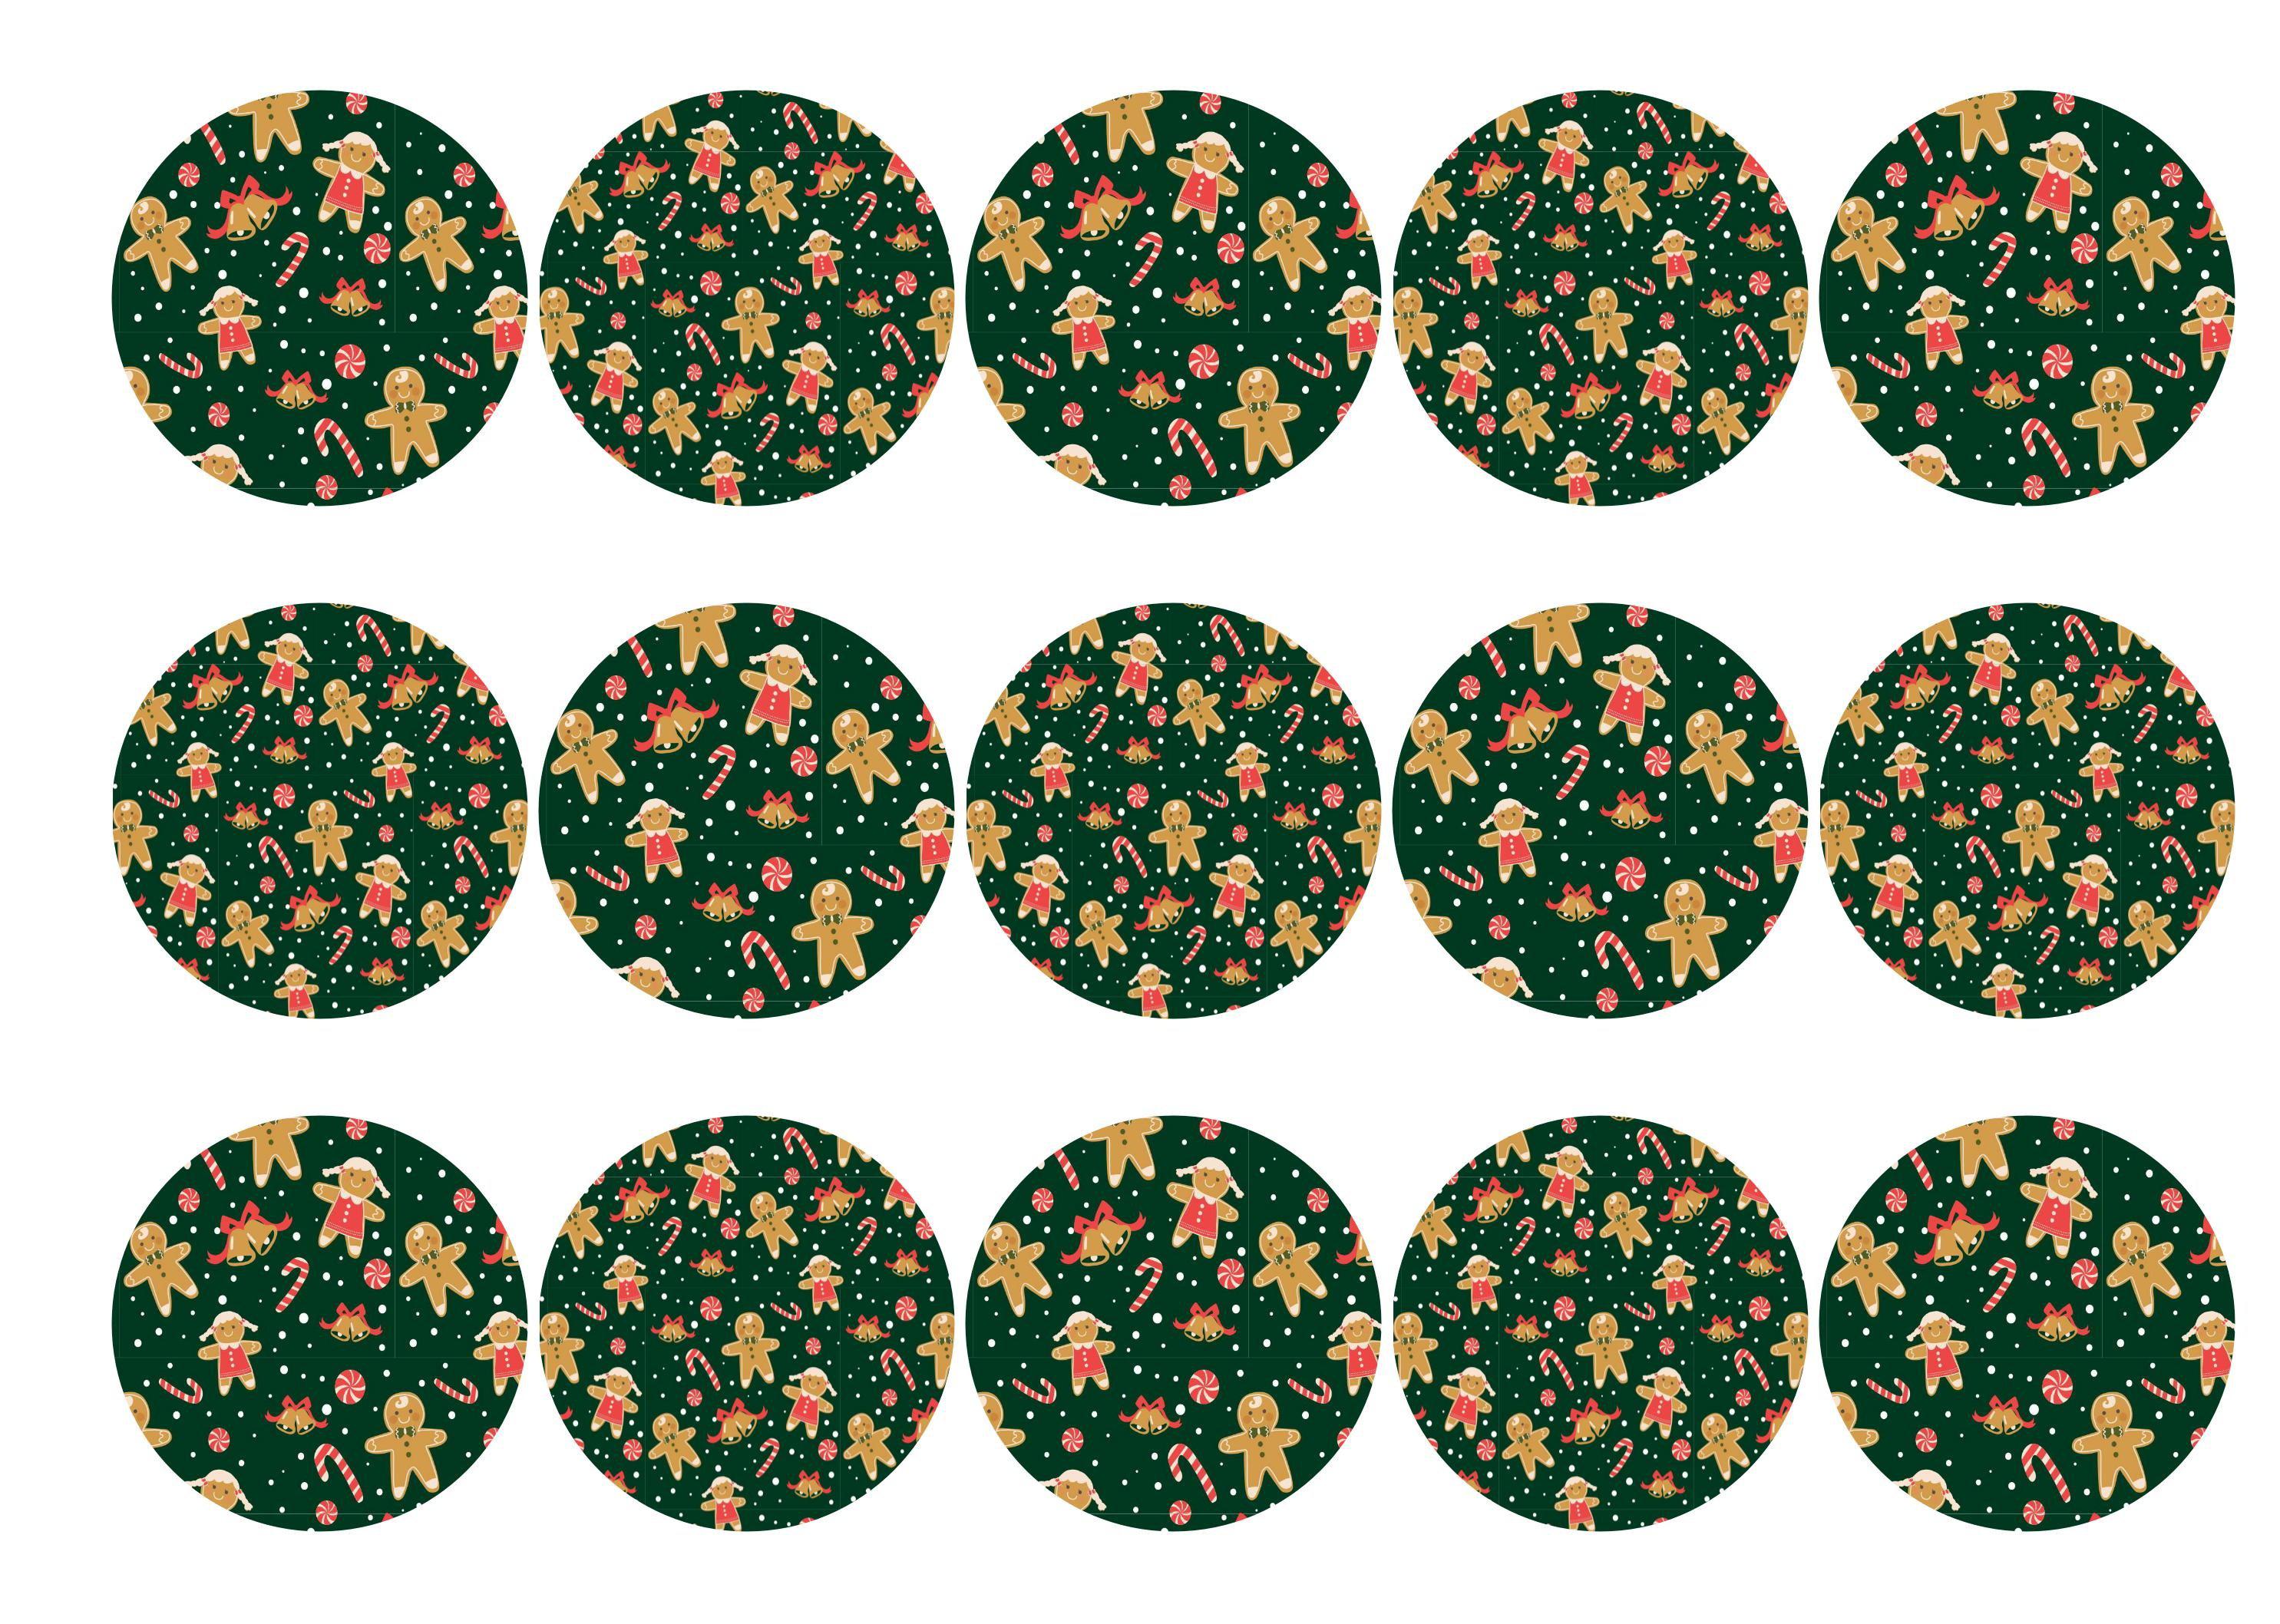 15 printed toppers with a green gingerbread man Christmas design